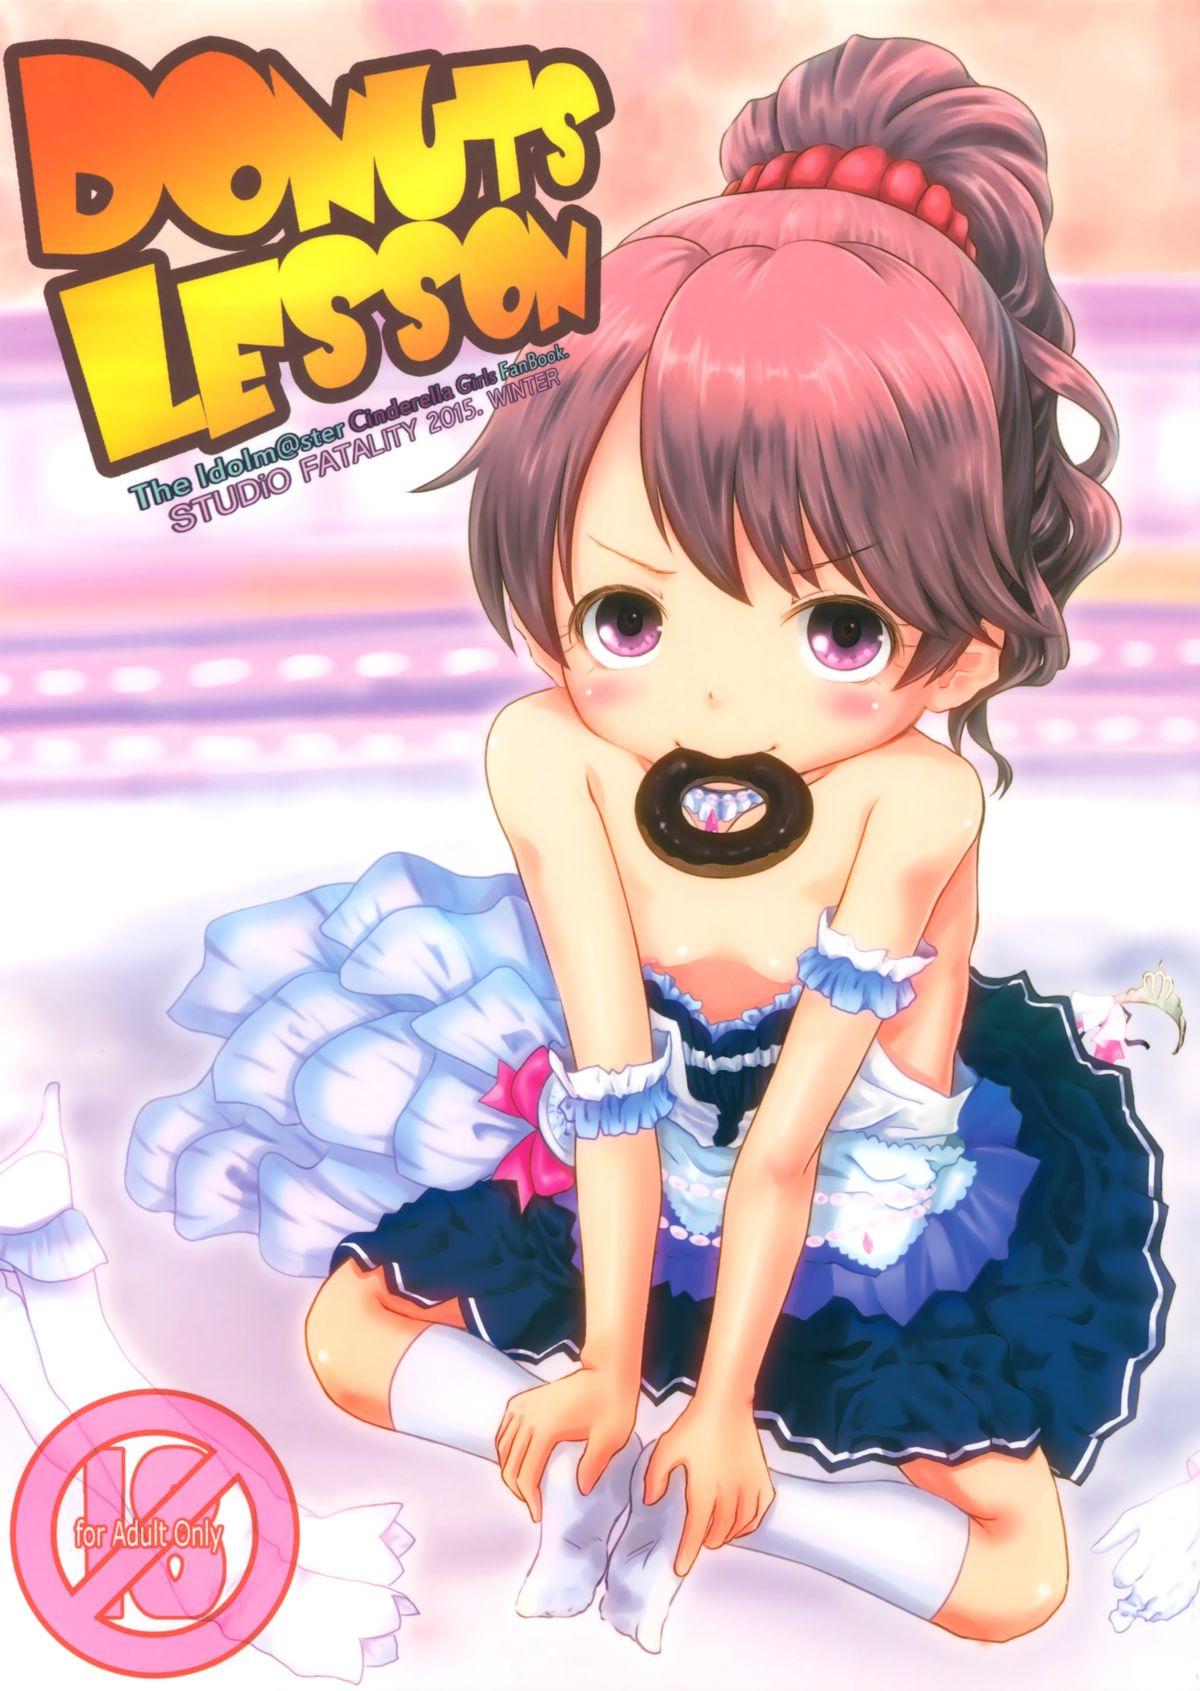 From DONUTS LESSON - The idolmaster Shaved - Page 1